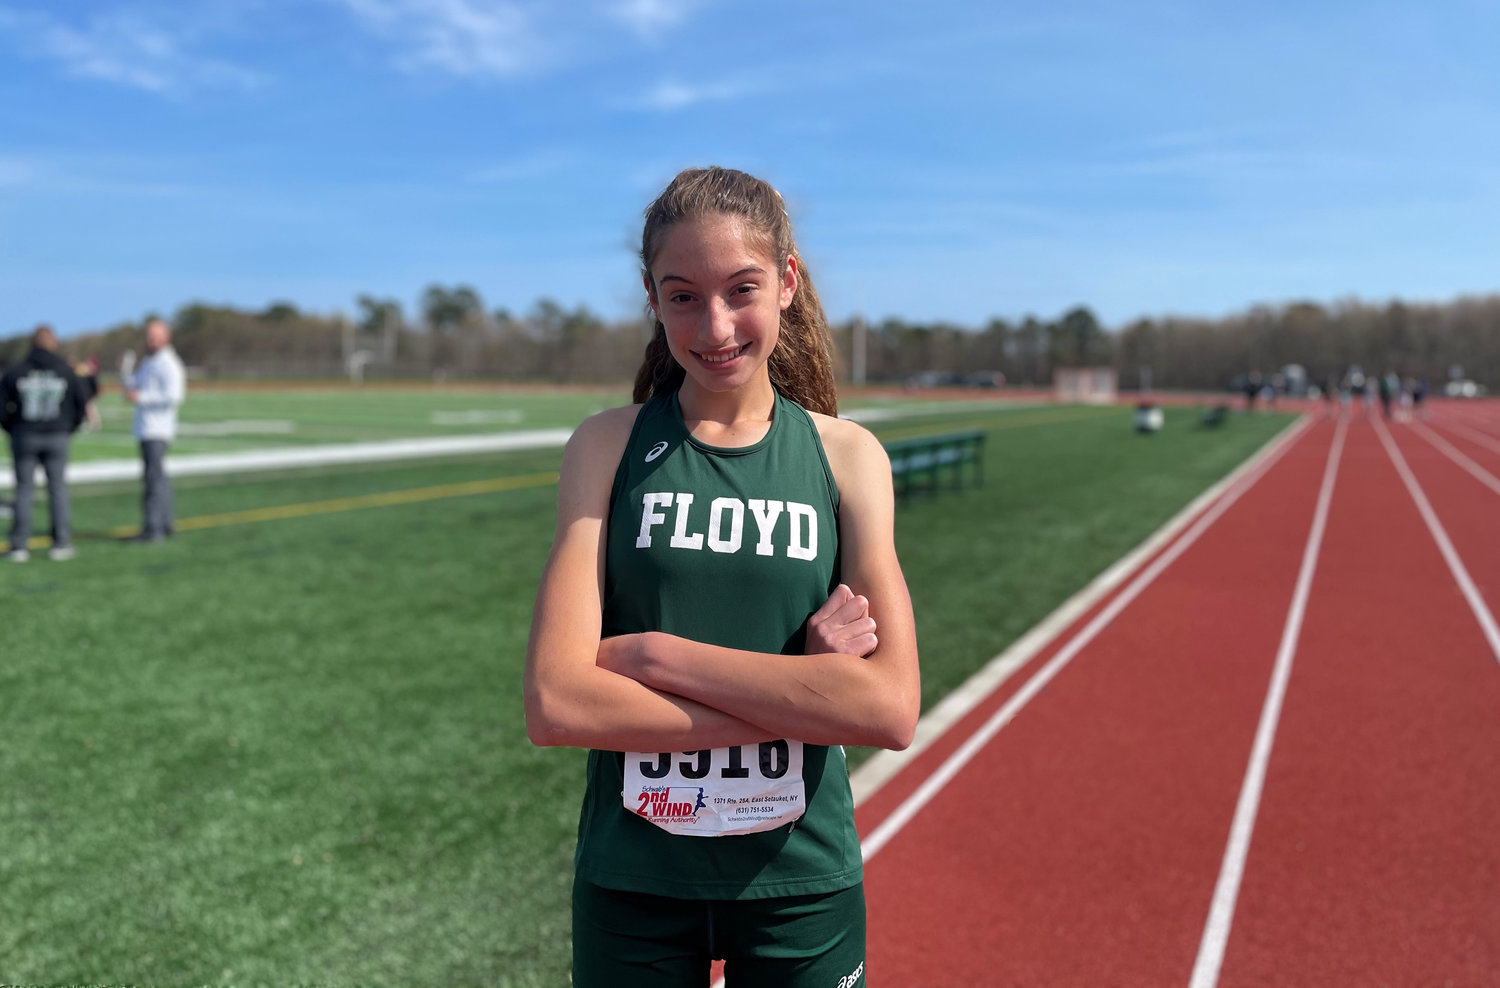 Zariel Macchia, an eighth-grade student-athlete from William Floyd Middle School is on the high school track team.